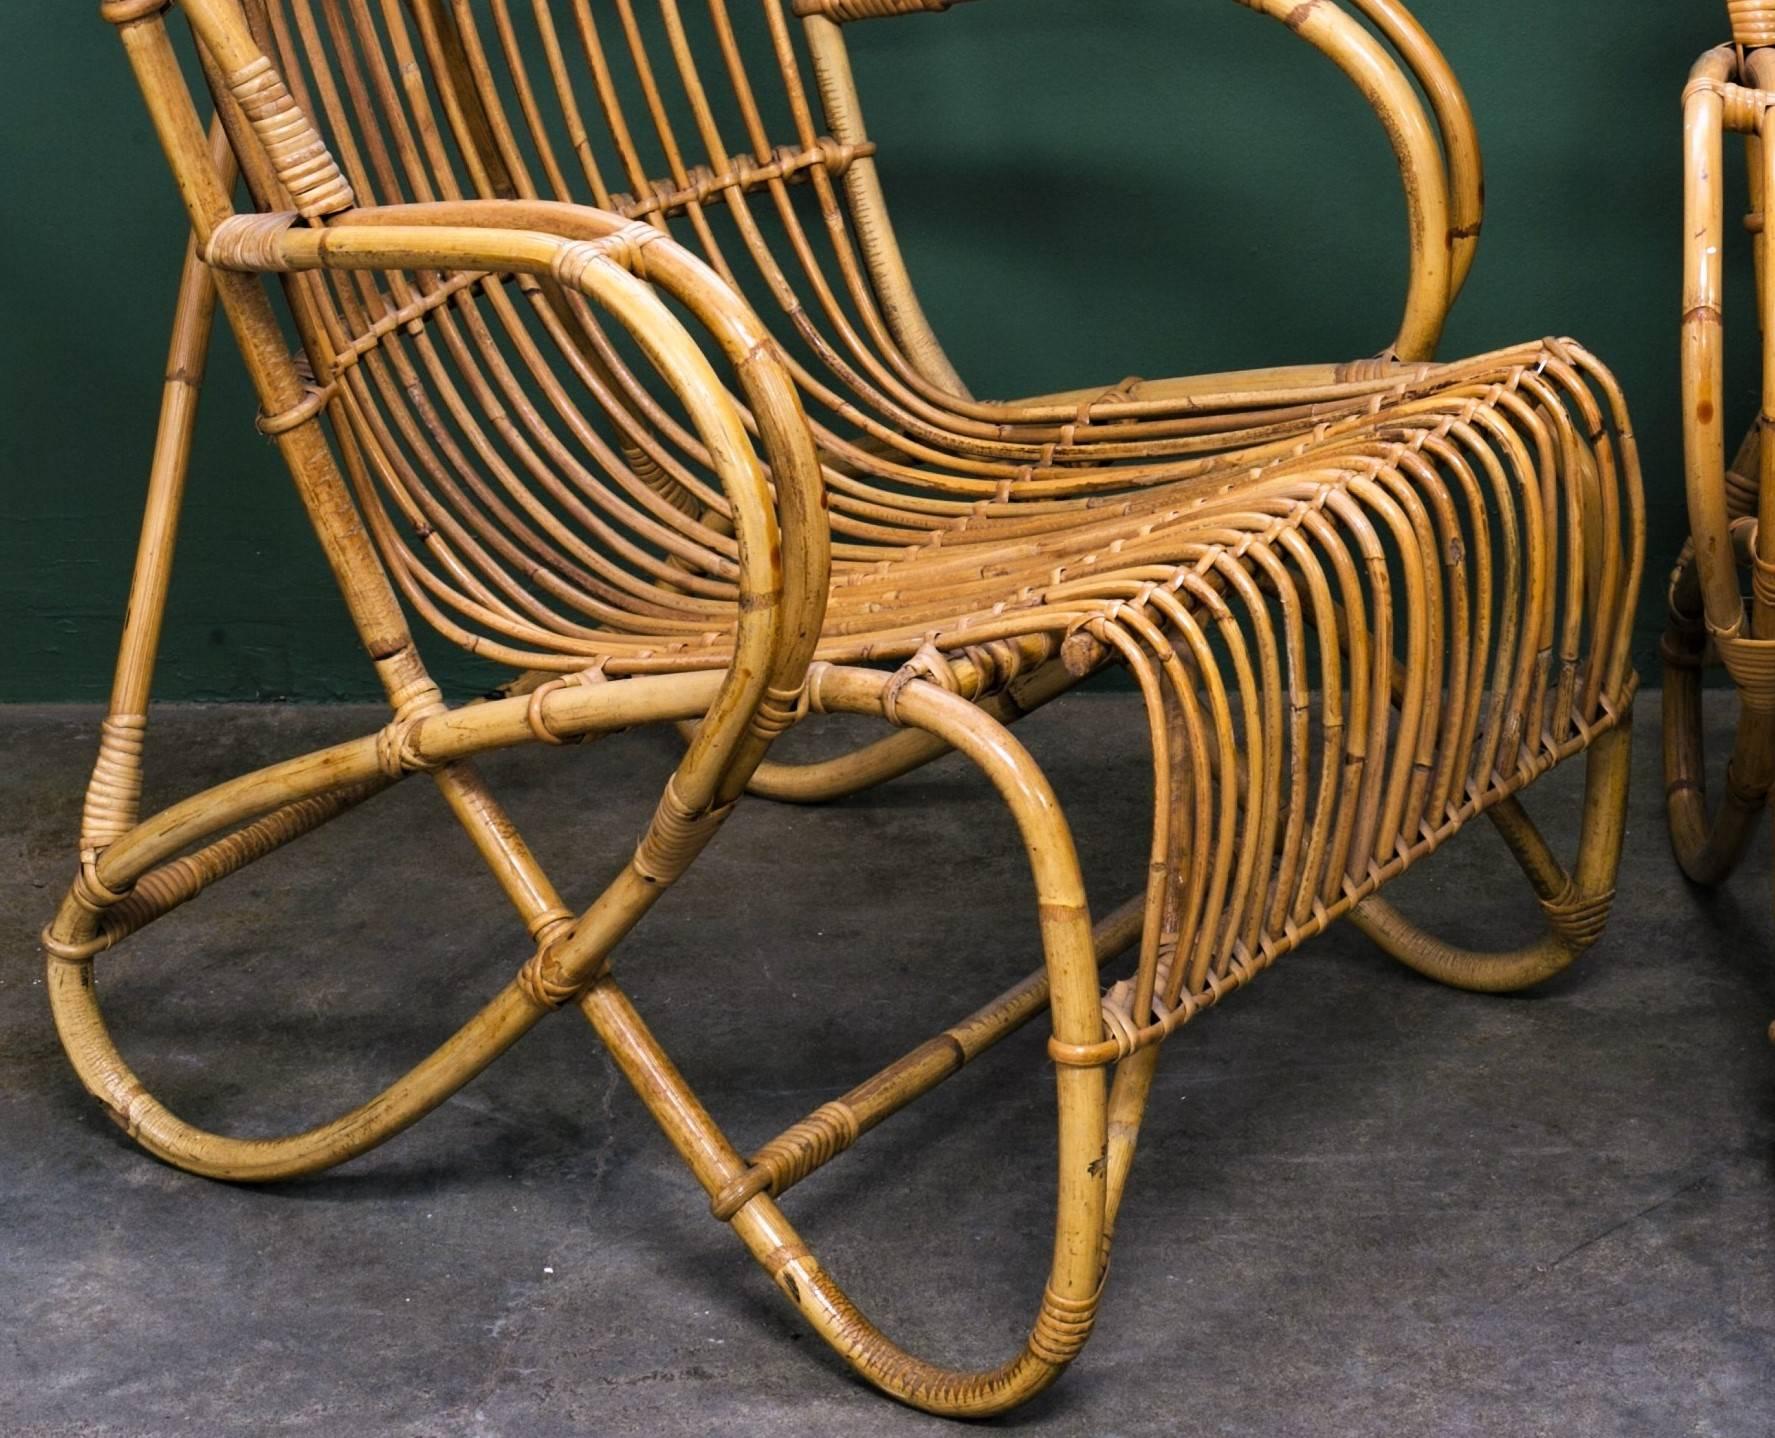 Vintage tortoise bamboo and rattan low arm chairs, circa 1950s. Designed by Dirk van Sliedrecht for Rohe Noordwolde. Similar to the style of Franco Albini. Beautiful lines and clean wicker- like design. For indoor use. Measurement listed is for one